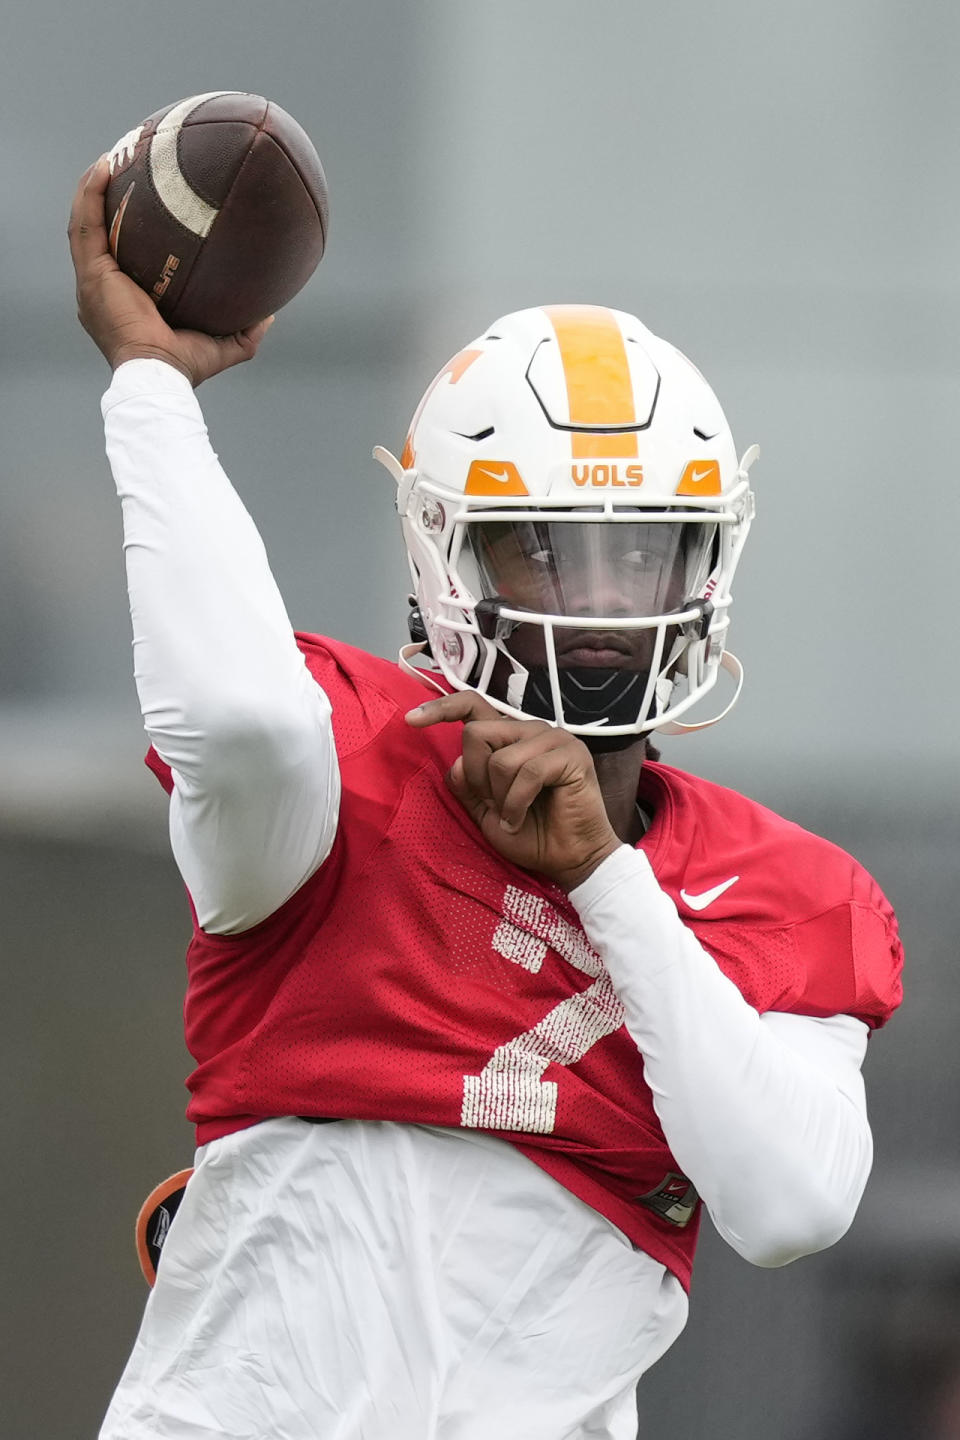 Tennessee Volunteers quarterback Joe Milton III (7) throws a pass during a practice session ahead of the 2022 Orange Bowl, Tuesday, Dec. 27, 2022, in Miami Shores, Fla. Tennessee will face the Clemson Tigers in the Orange Bowl on Friday, Dec. 30.(AP Photo/Rebecca Blackwell)